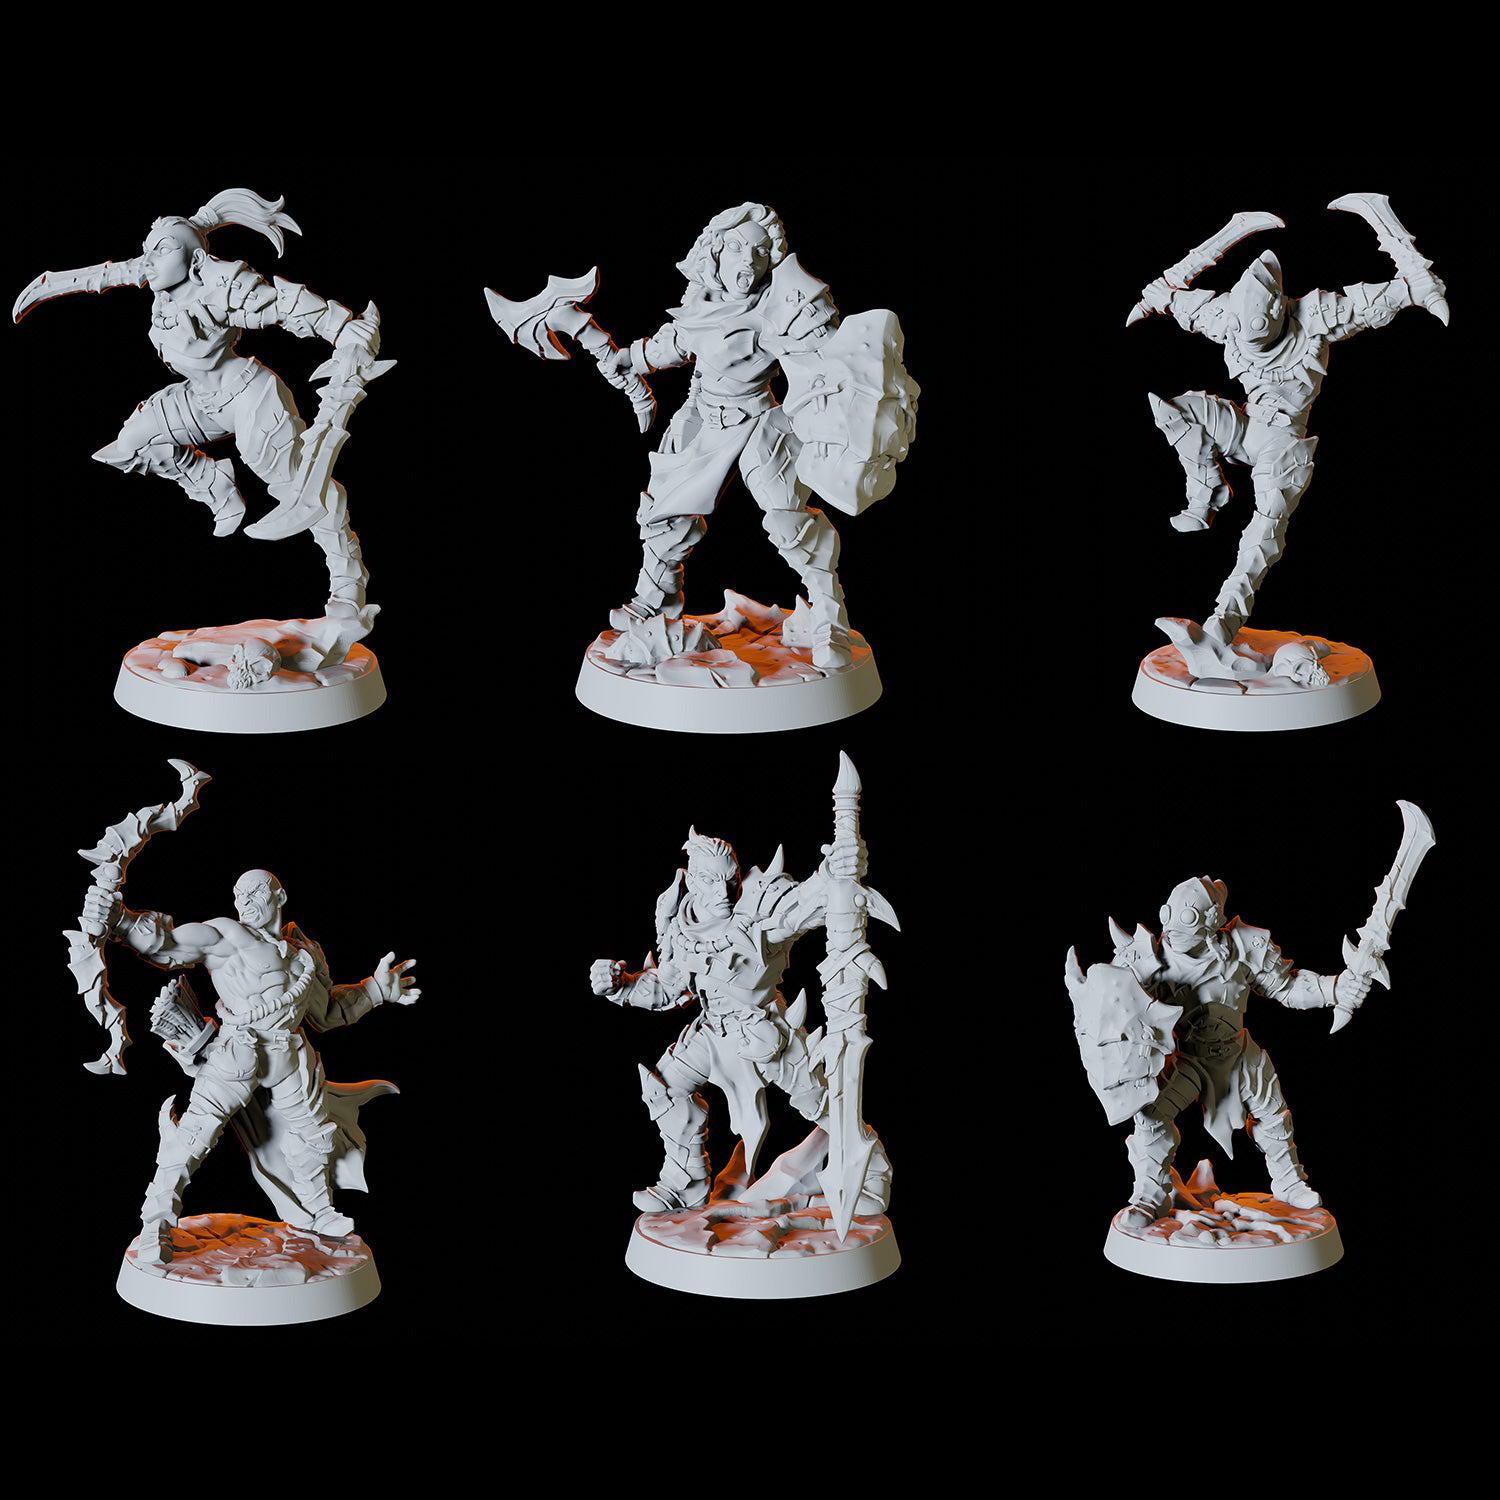 Human Bandit Army - Six Bandits Miniature for Dungeons and Dragons